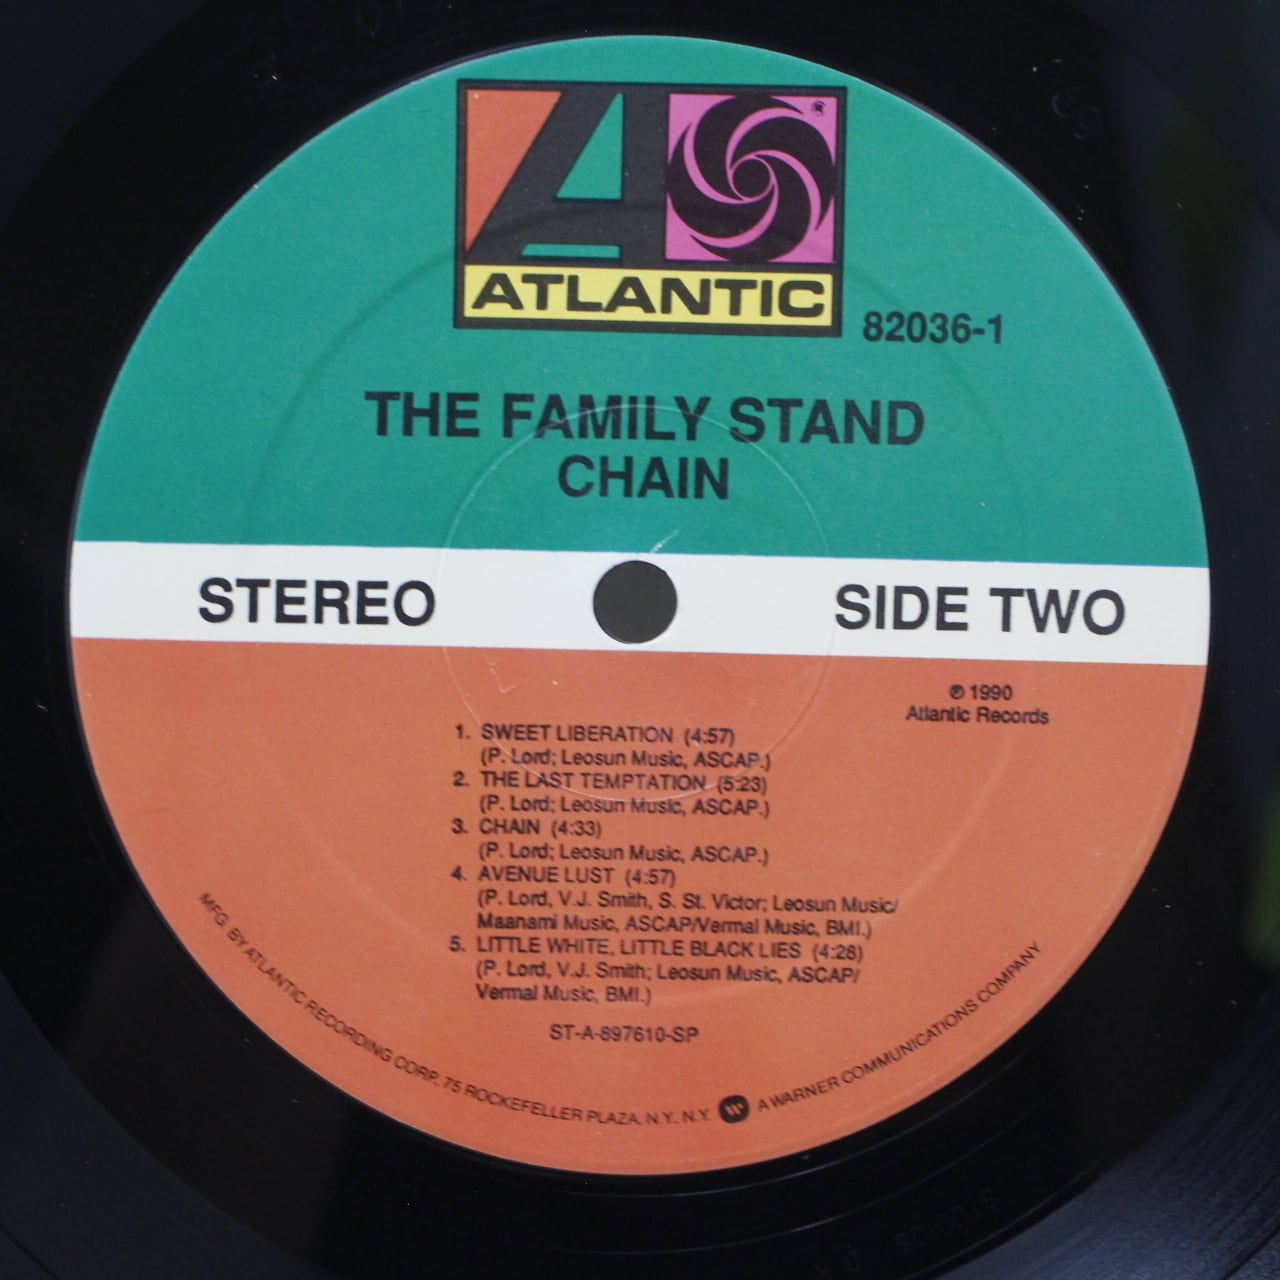 The Family Stand / Chain [7567-82036-1] - 画像4